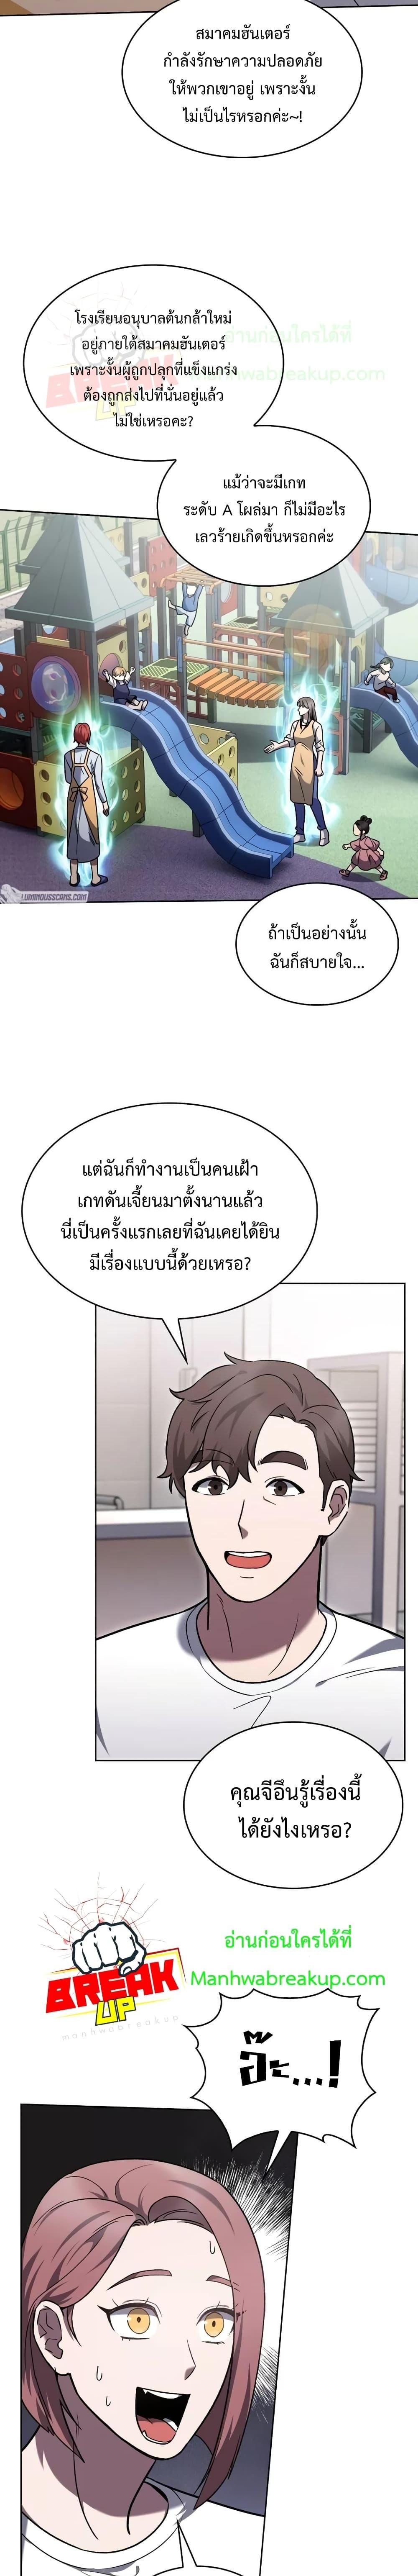 The Delivery Man From Murim ตอนที่ 14 (13)